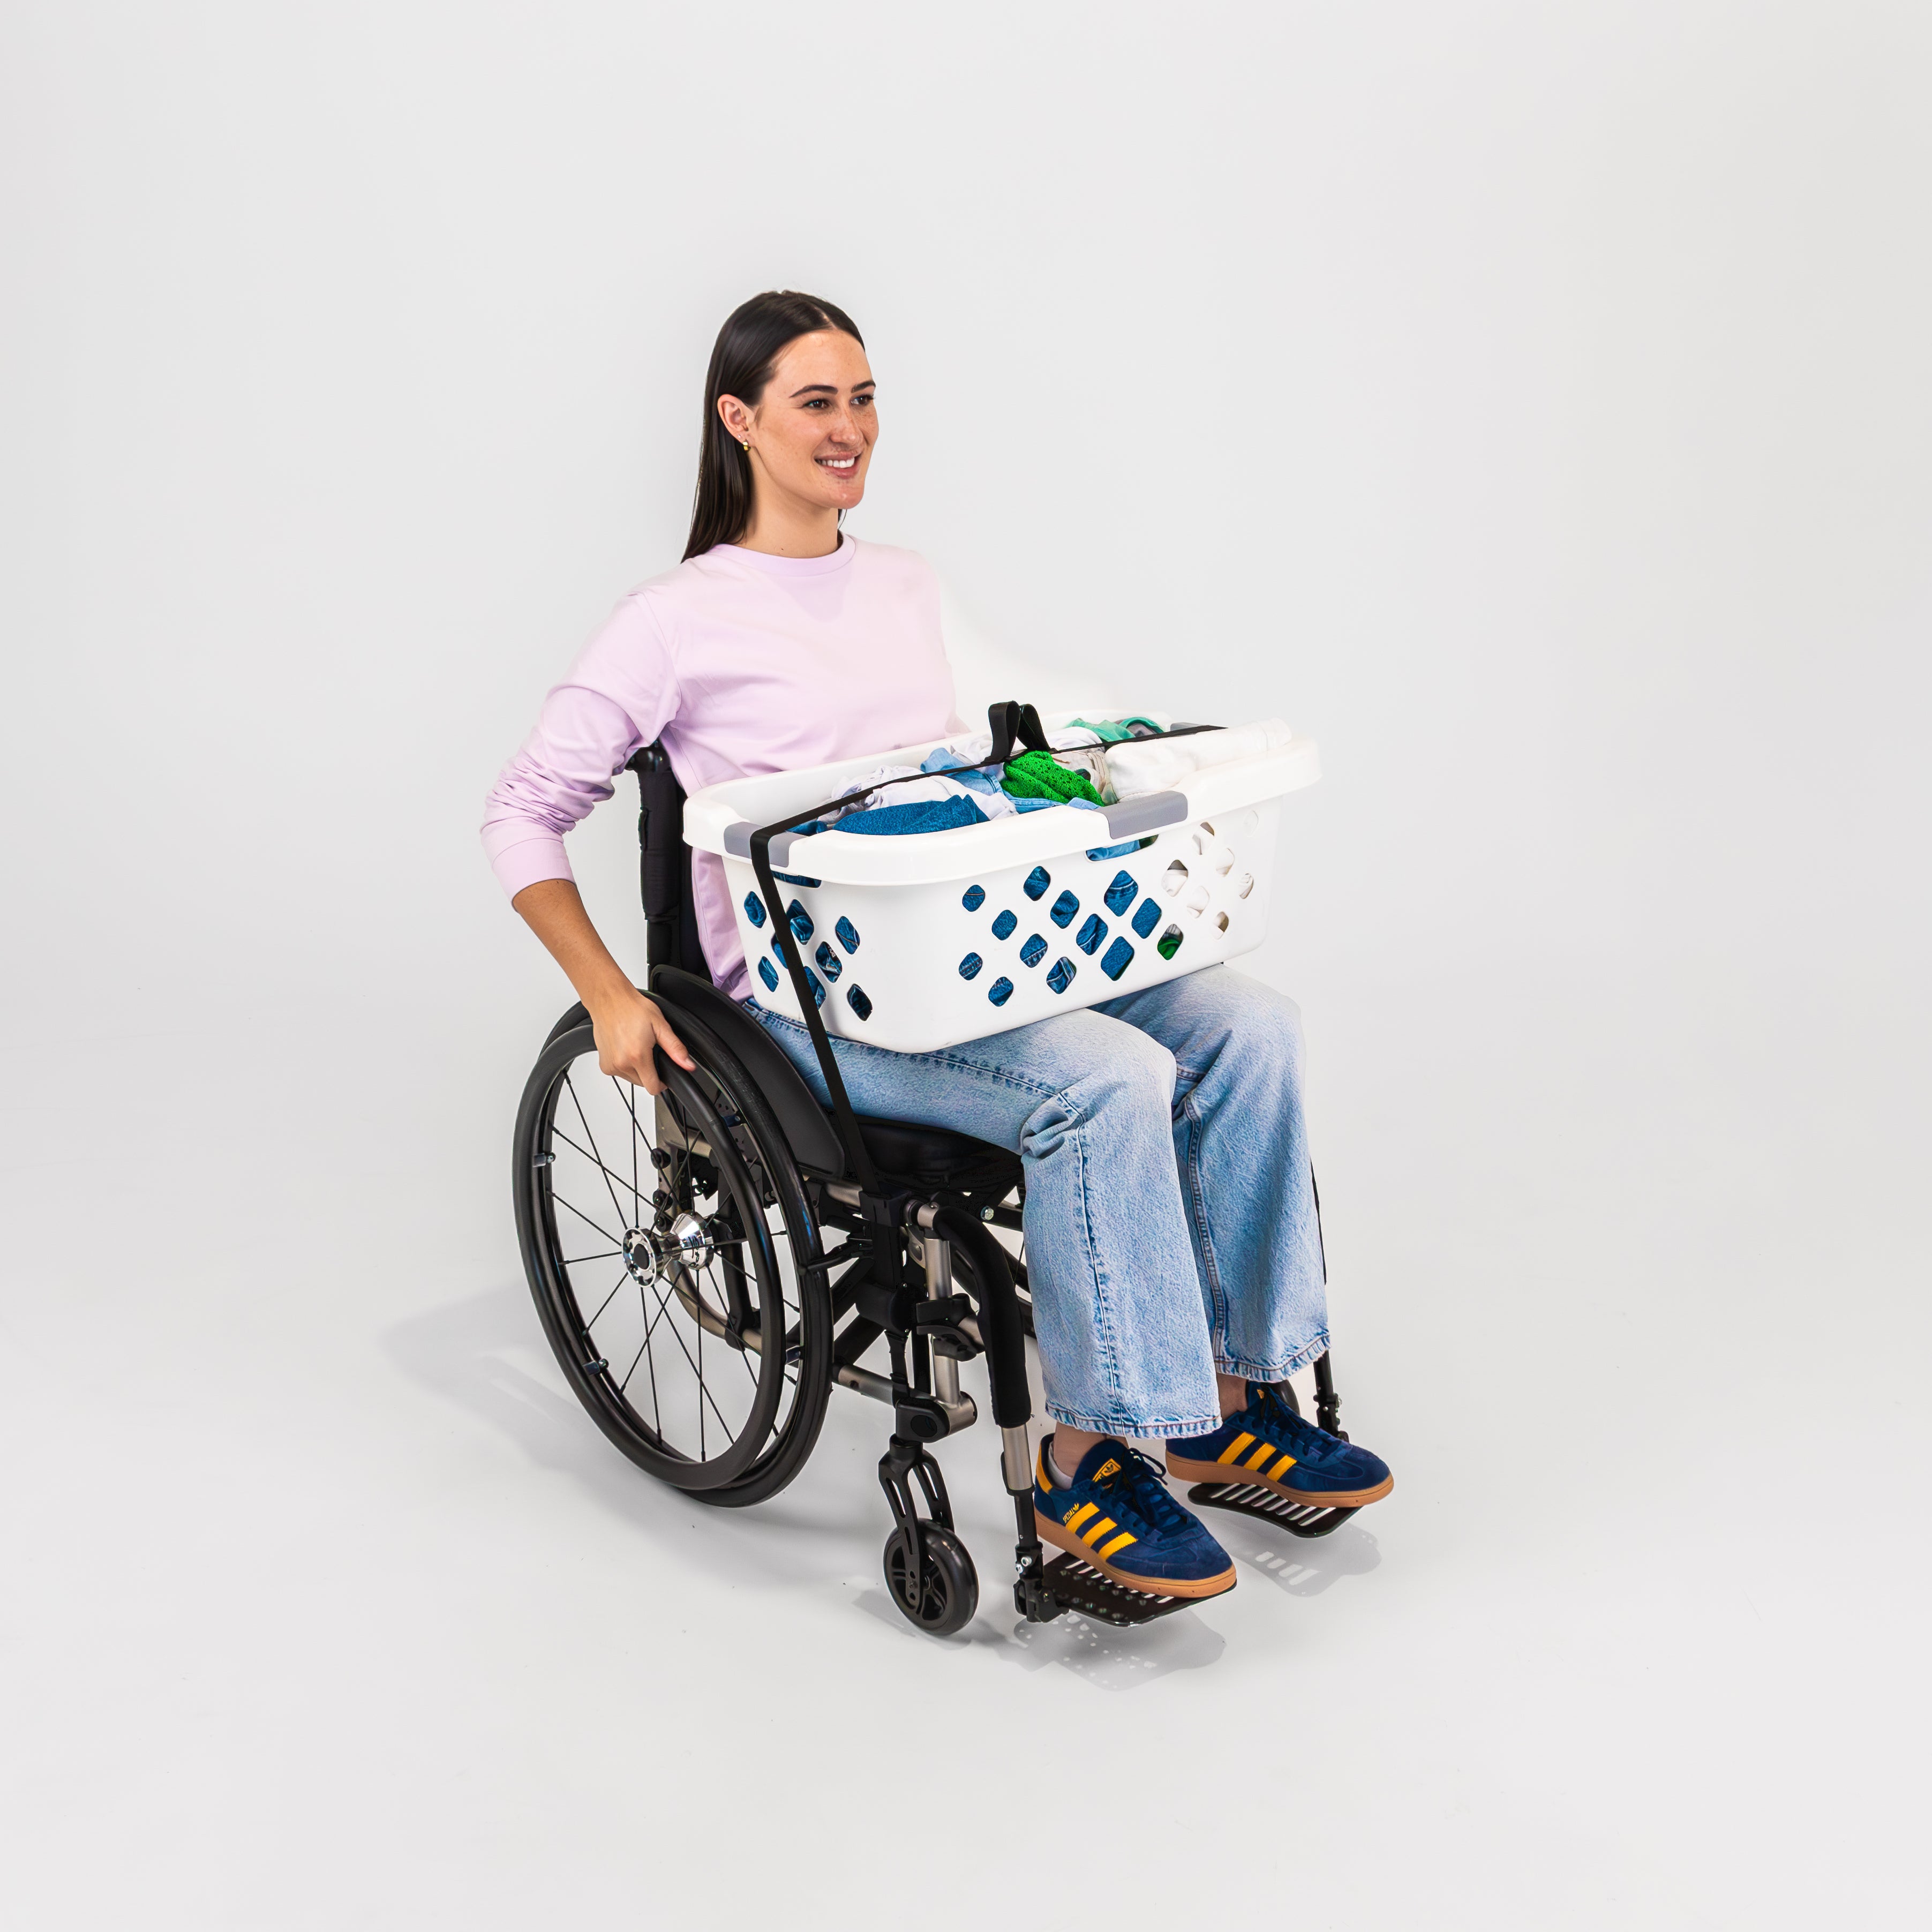 Smiling women with pink t-shirt seated in a wheelchair with a washing basket secured to her lap using LapStacker Flex.